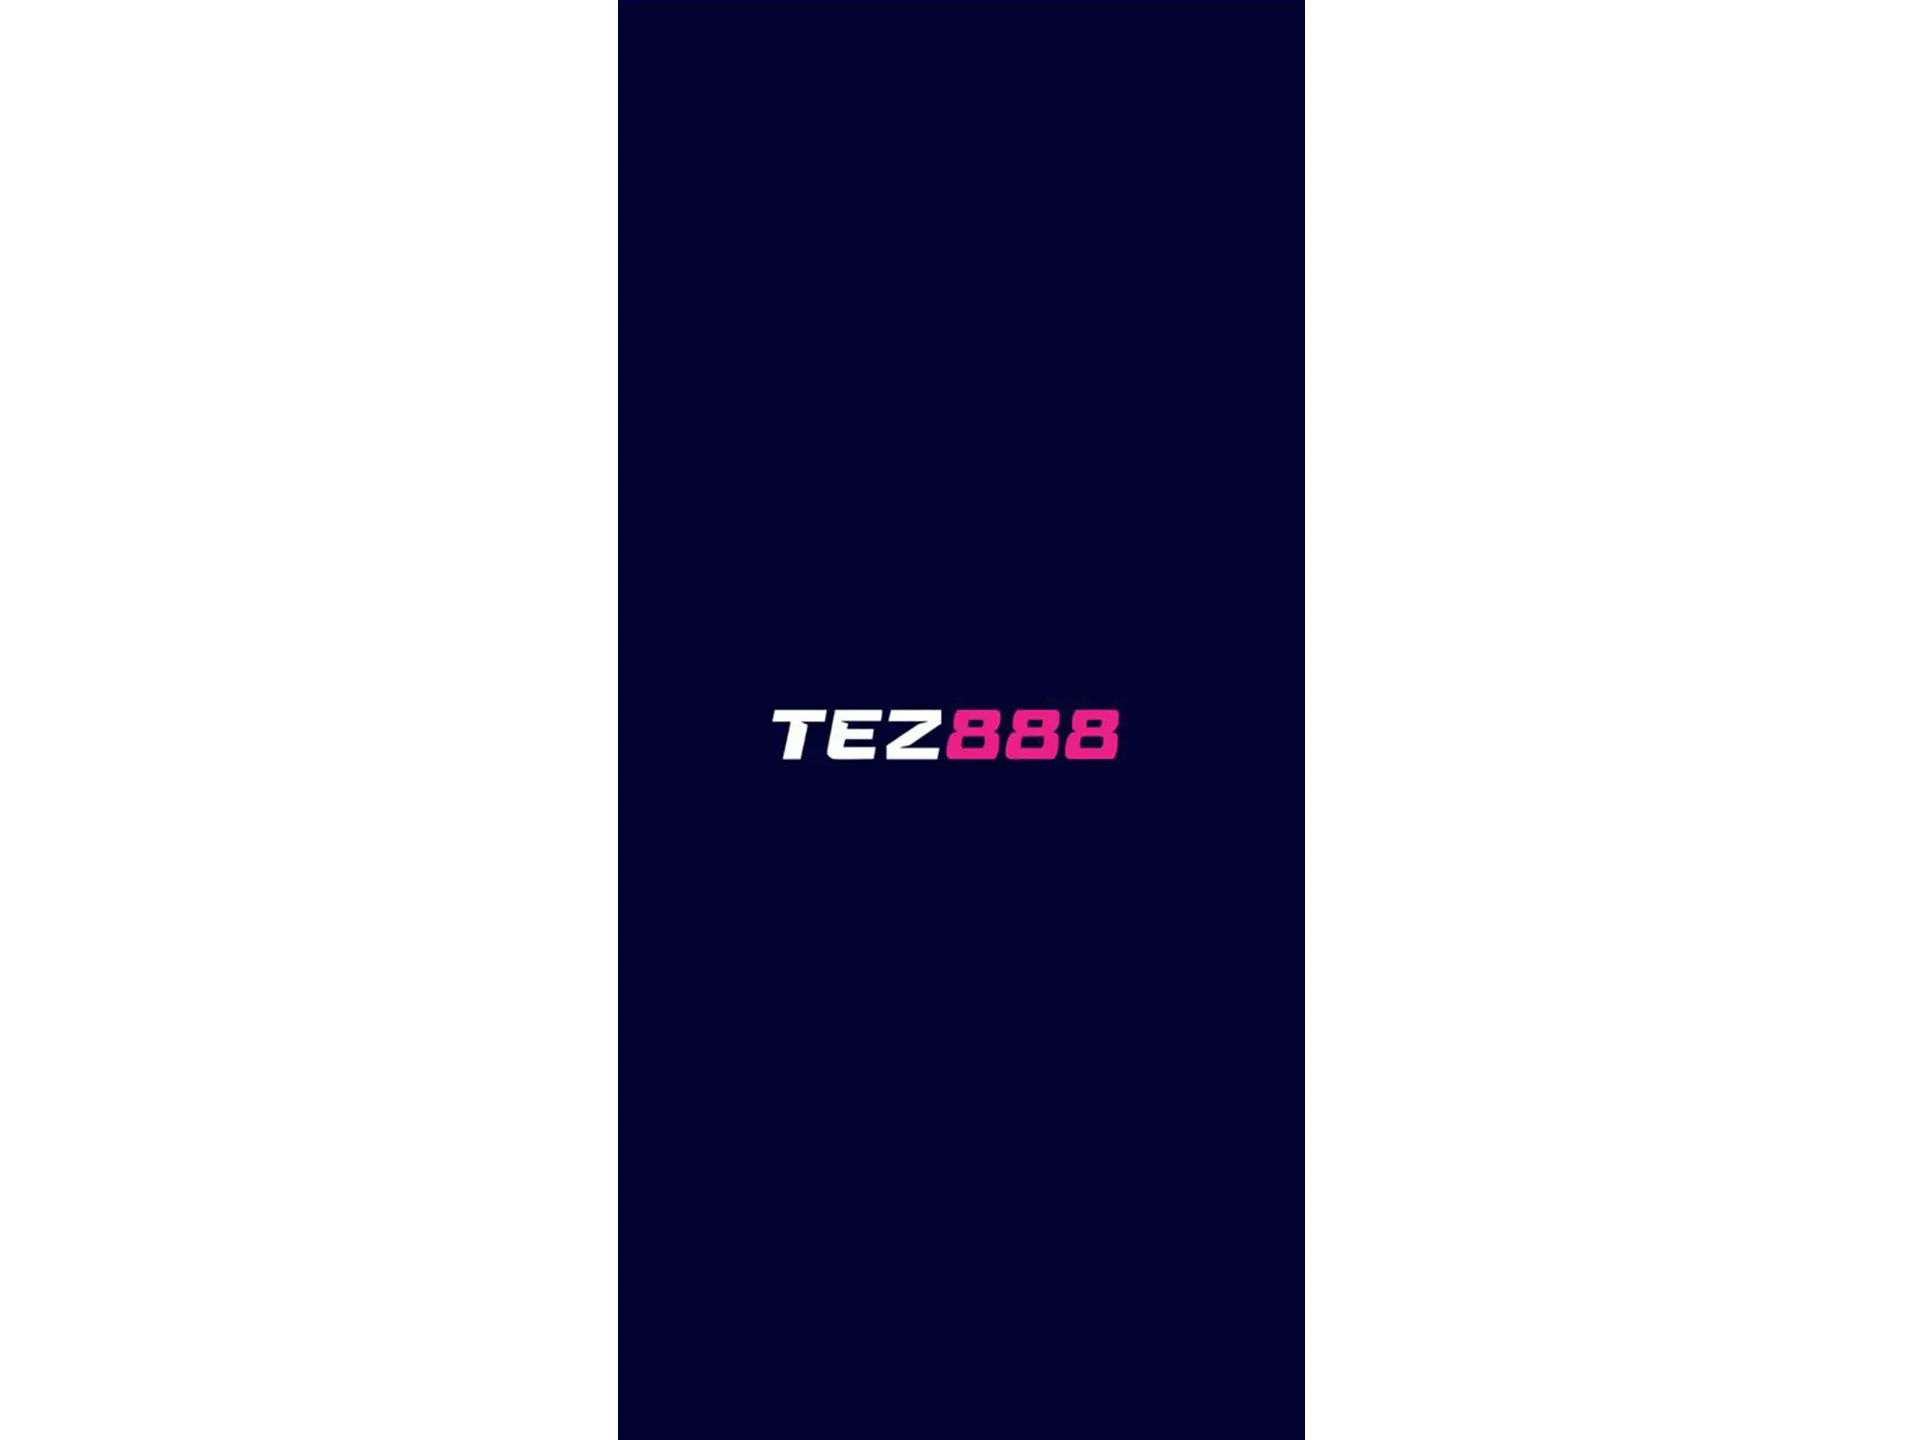 Launch the Tez888 app on your Android mobile device.